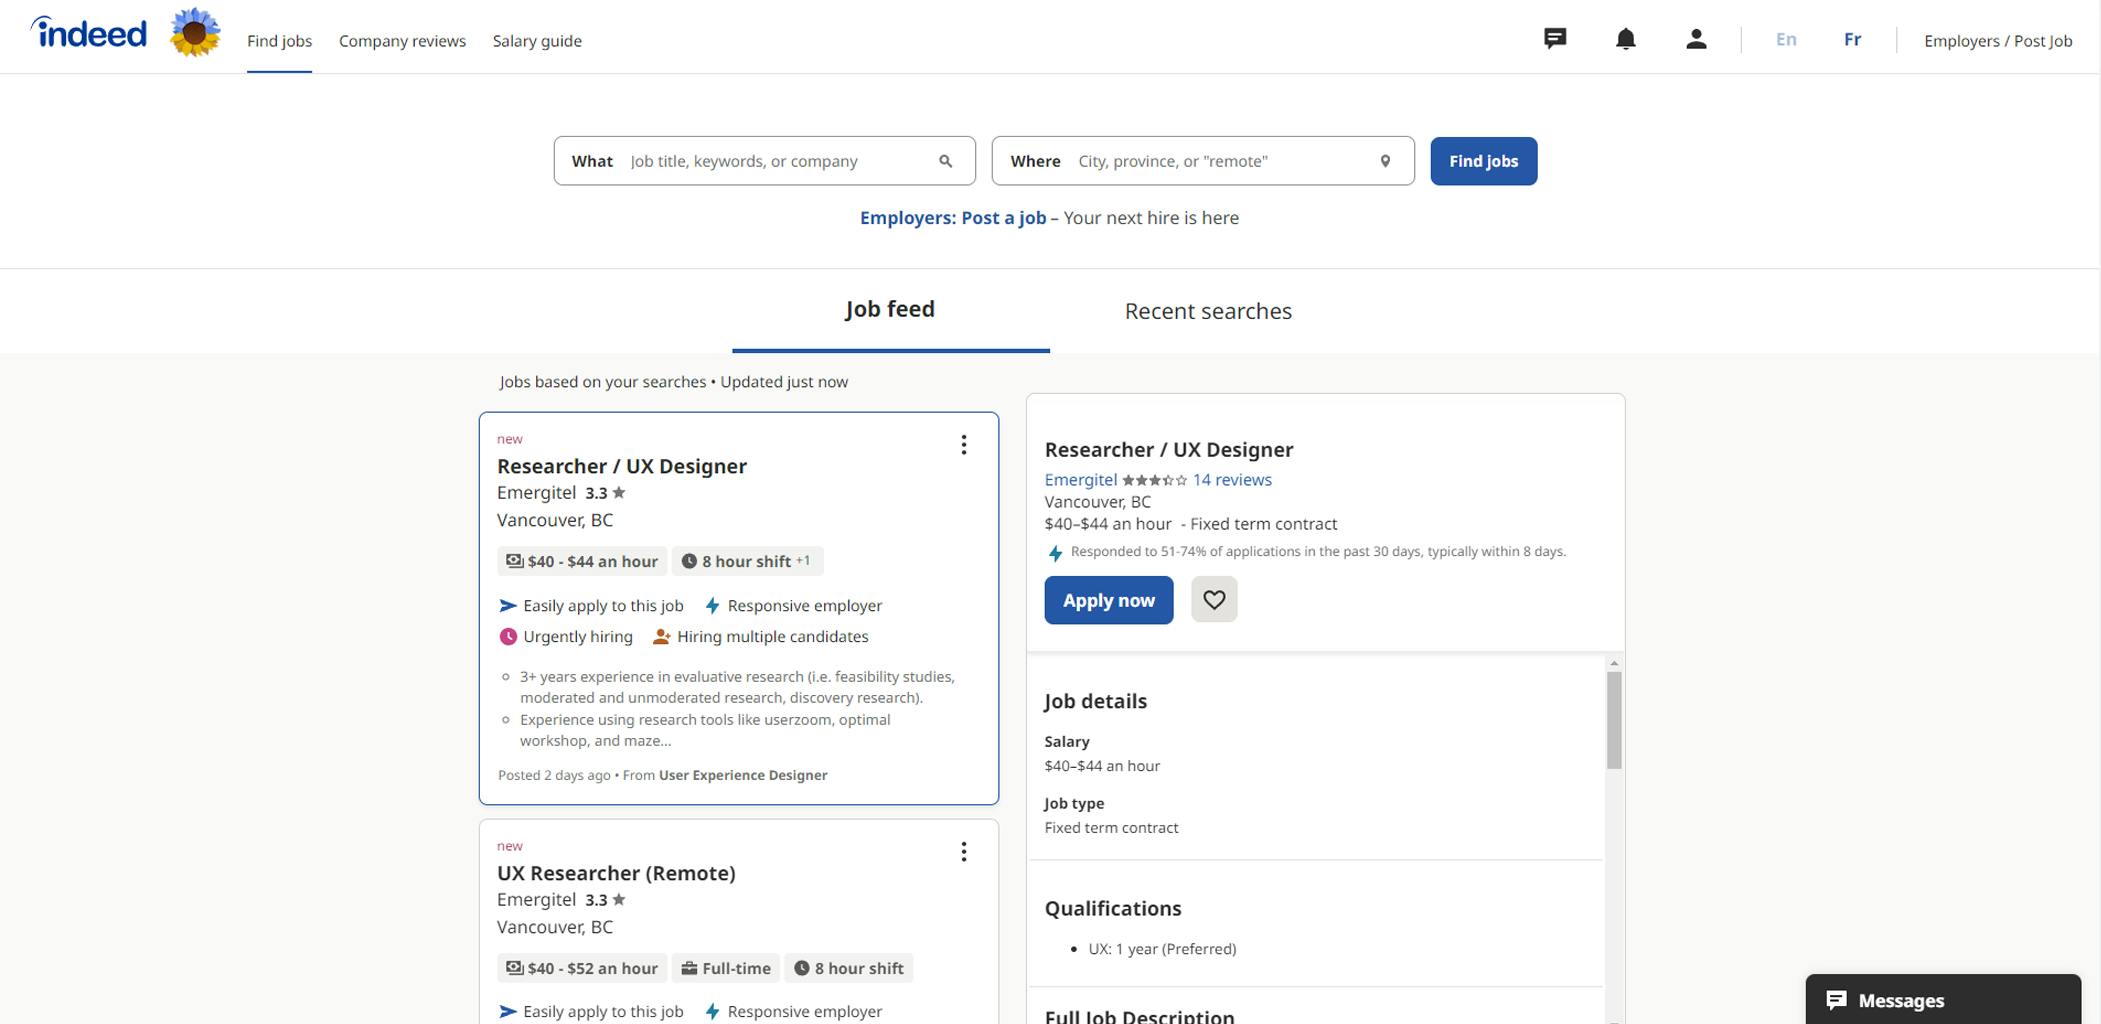 An image of the Indeed job board landing page.